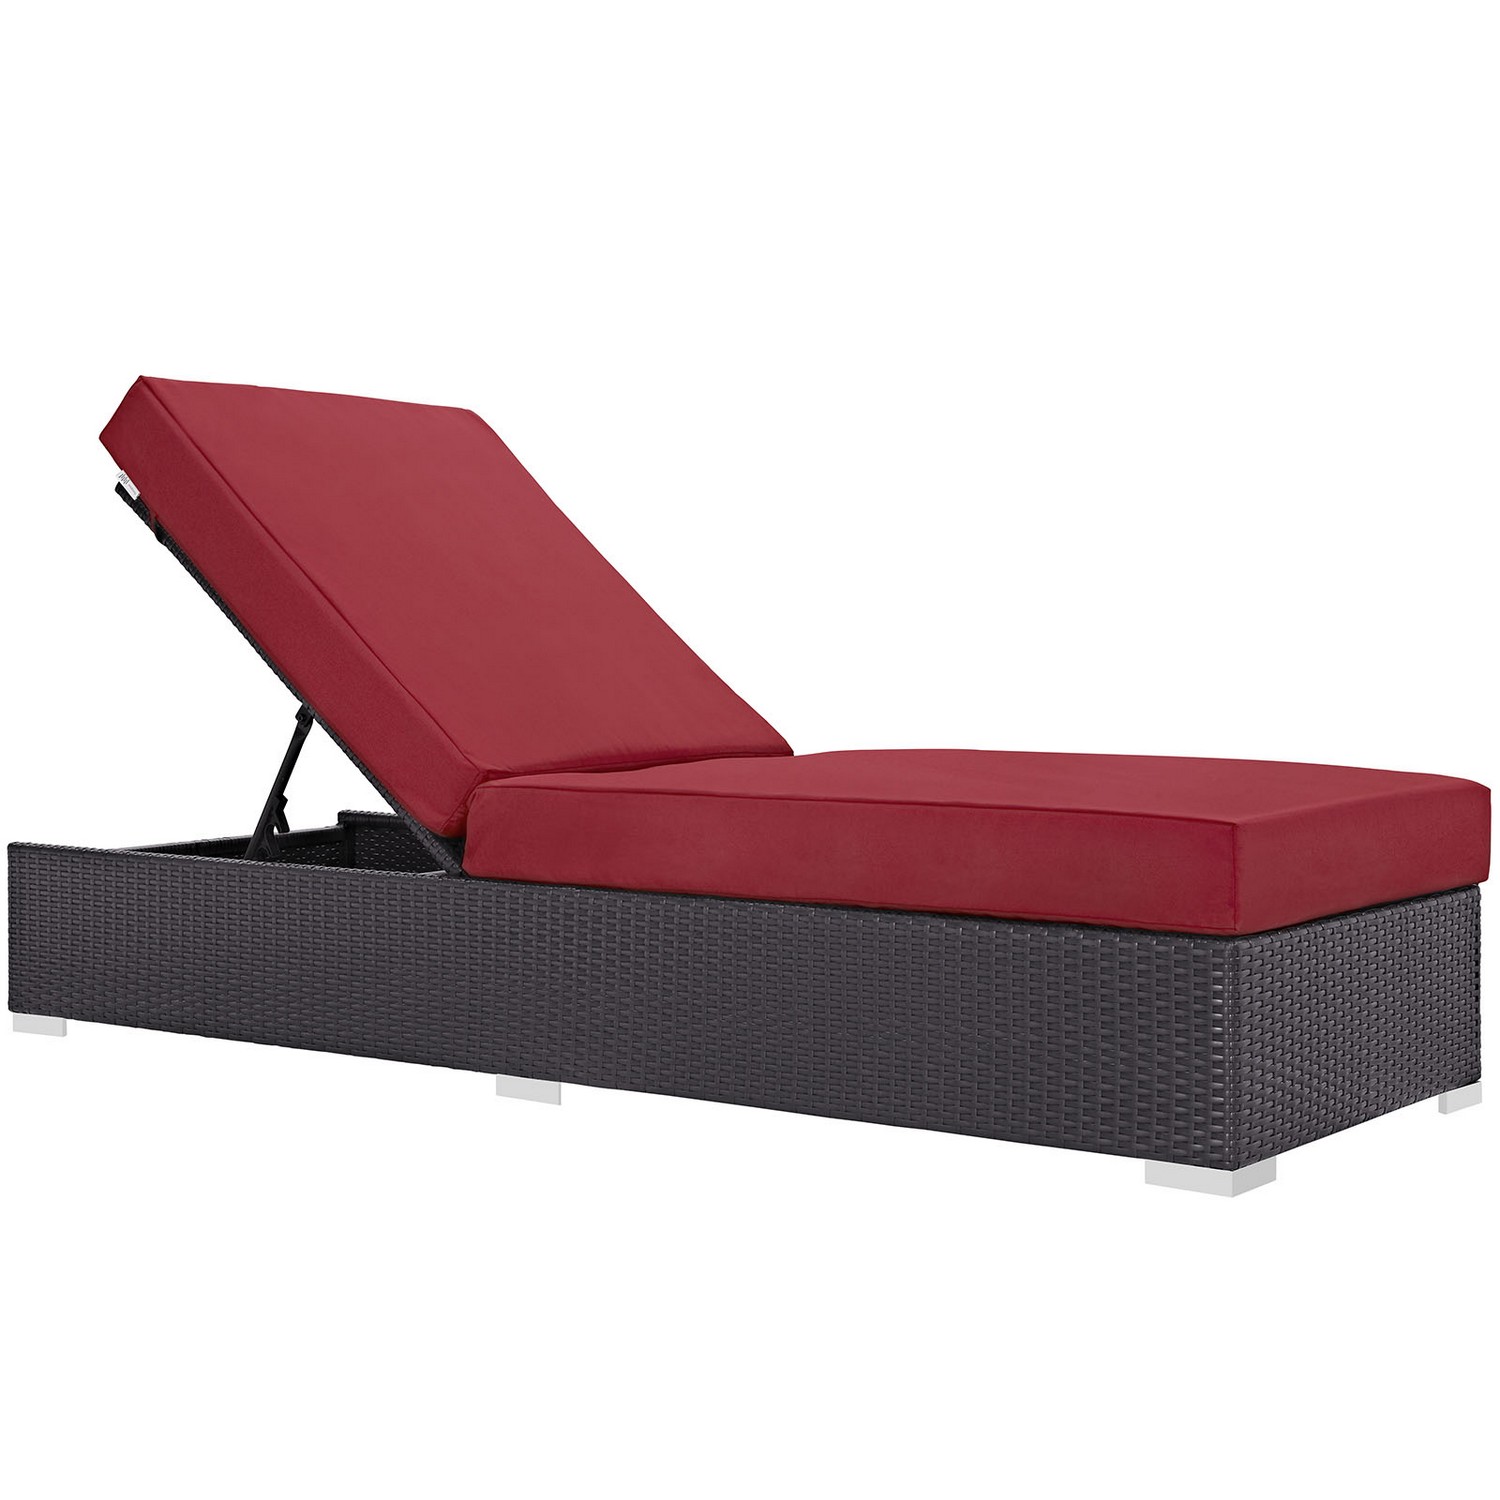 Modway Convene Outdoor Patio Chaise Lounge - Espresso Red